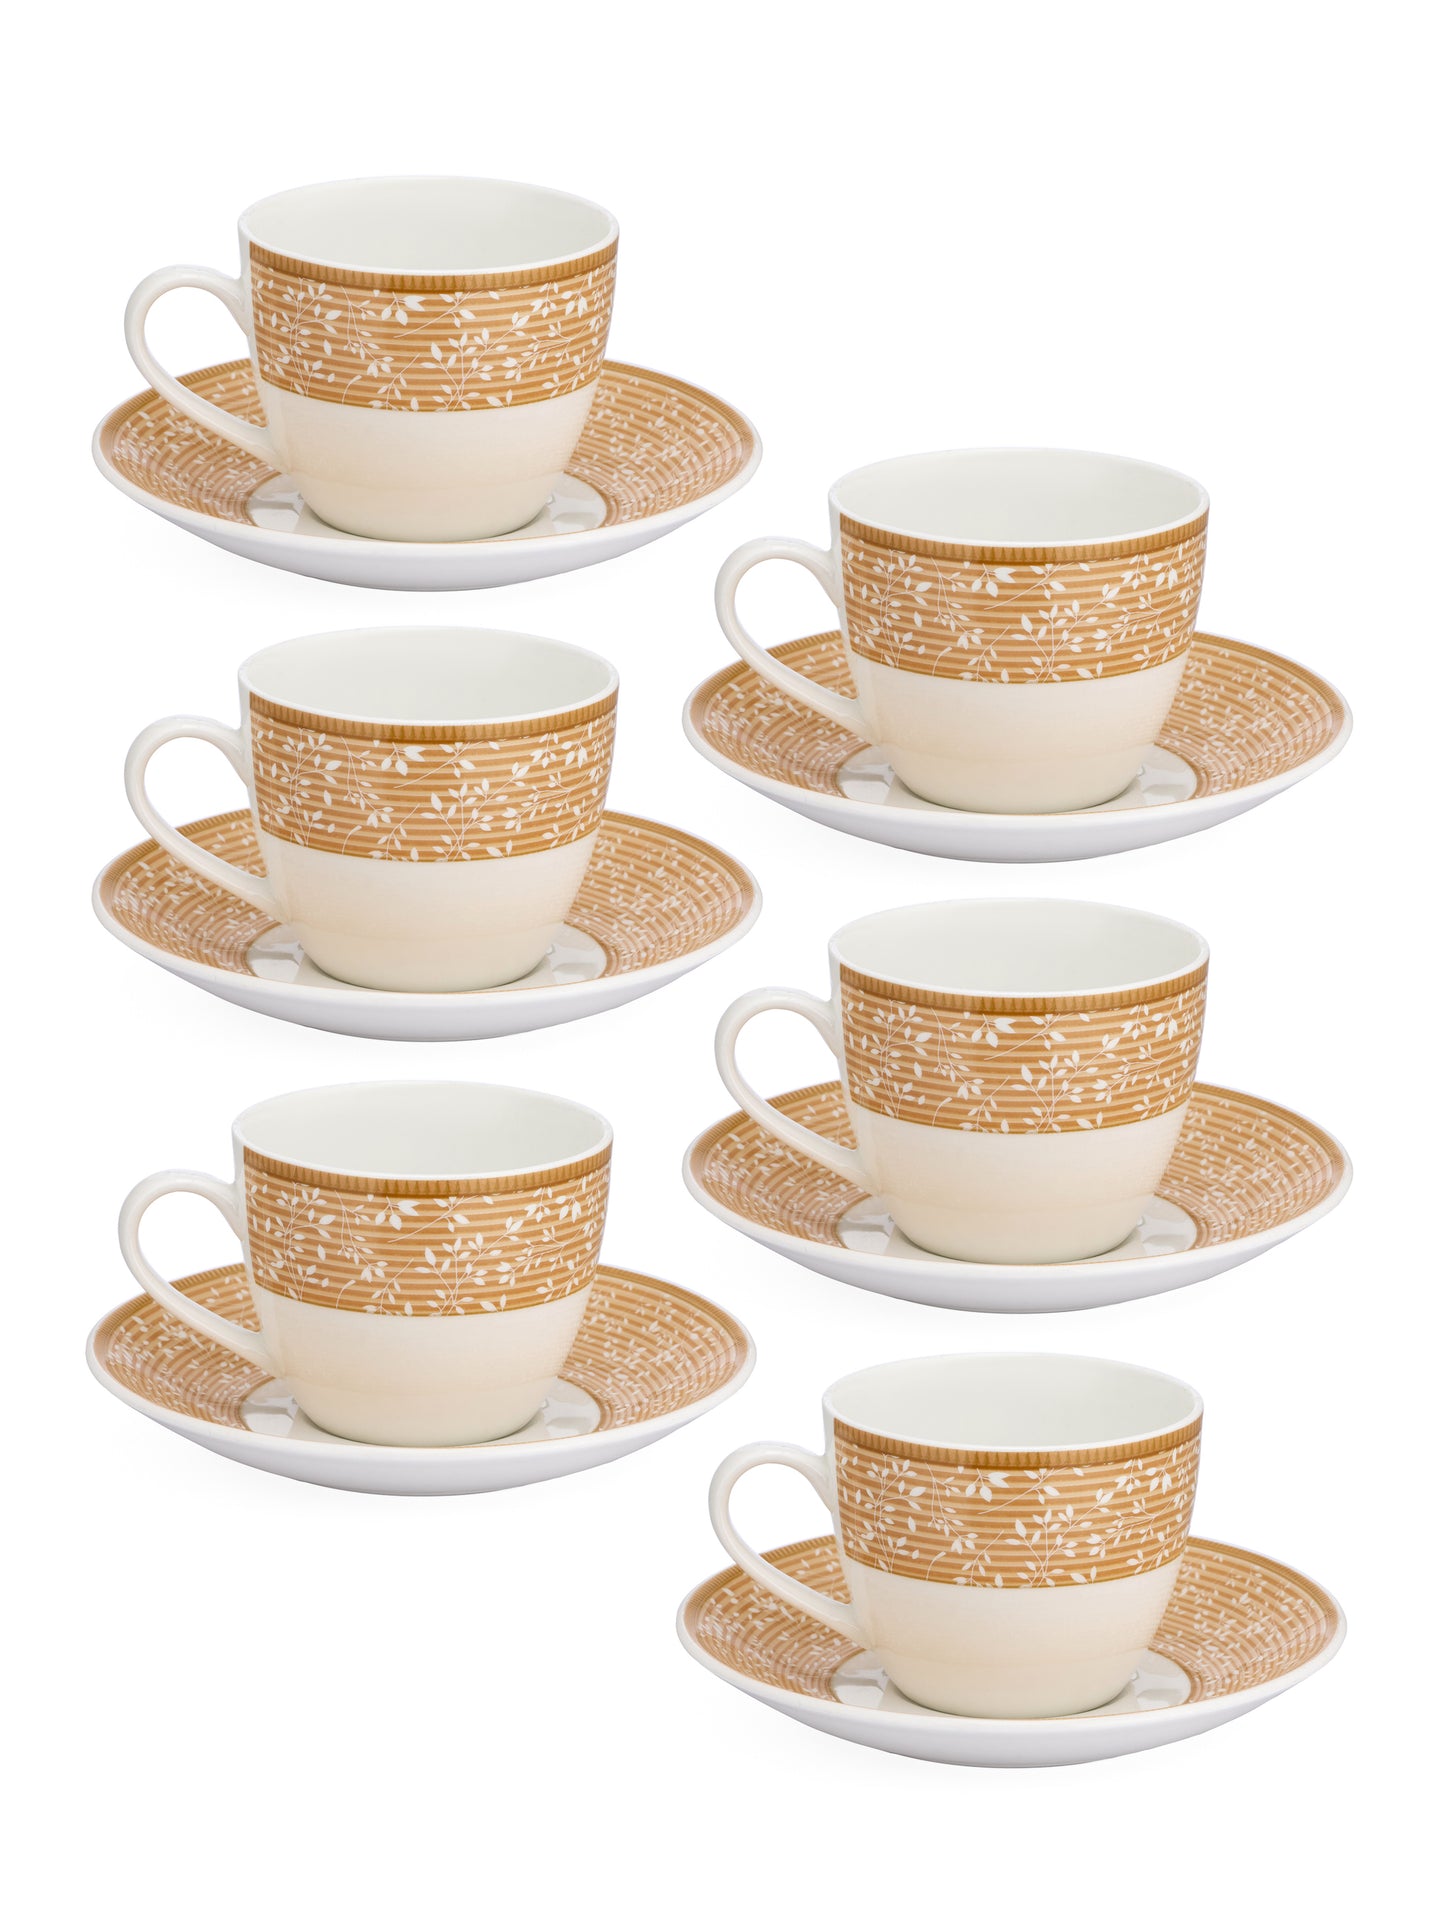 Cream Super Cup & Saucer, 170ml, Set of 12 (6 Cups + 6 Saucers) (S305)